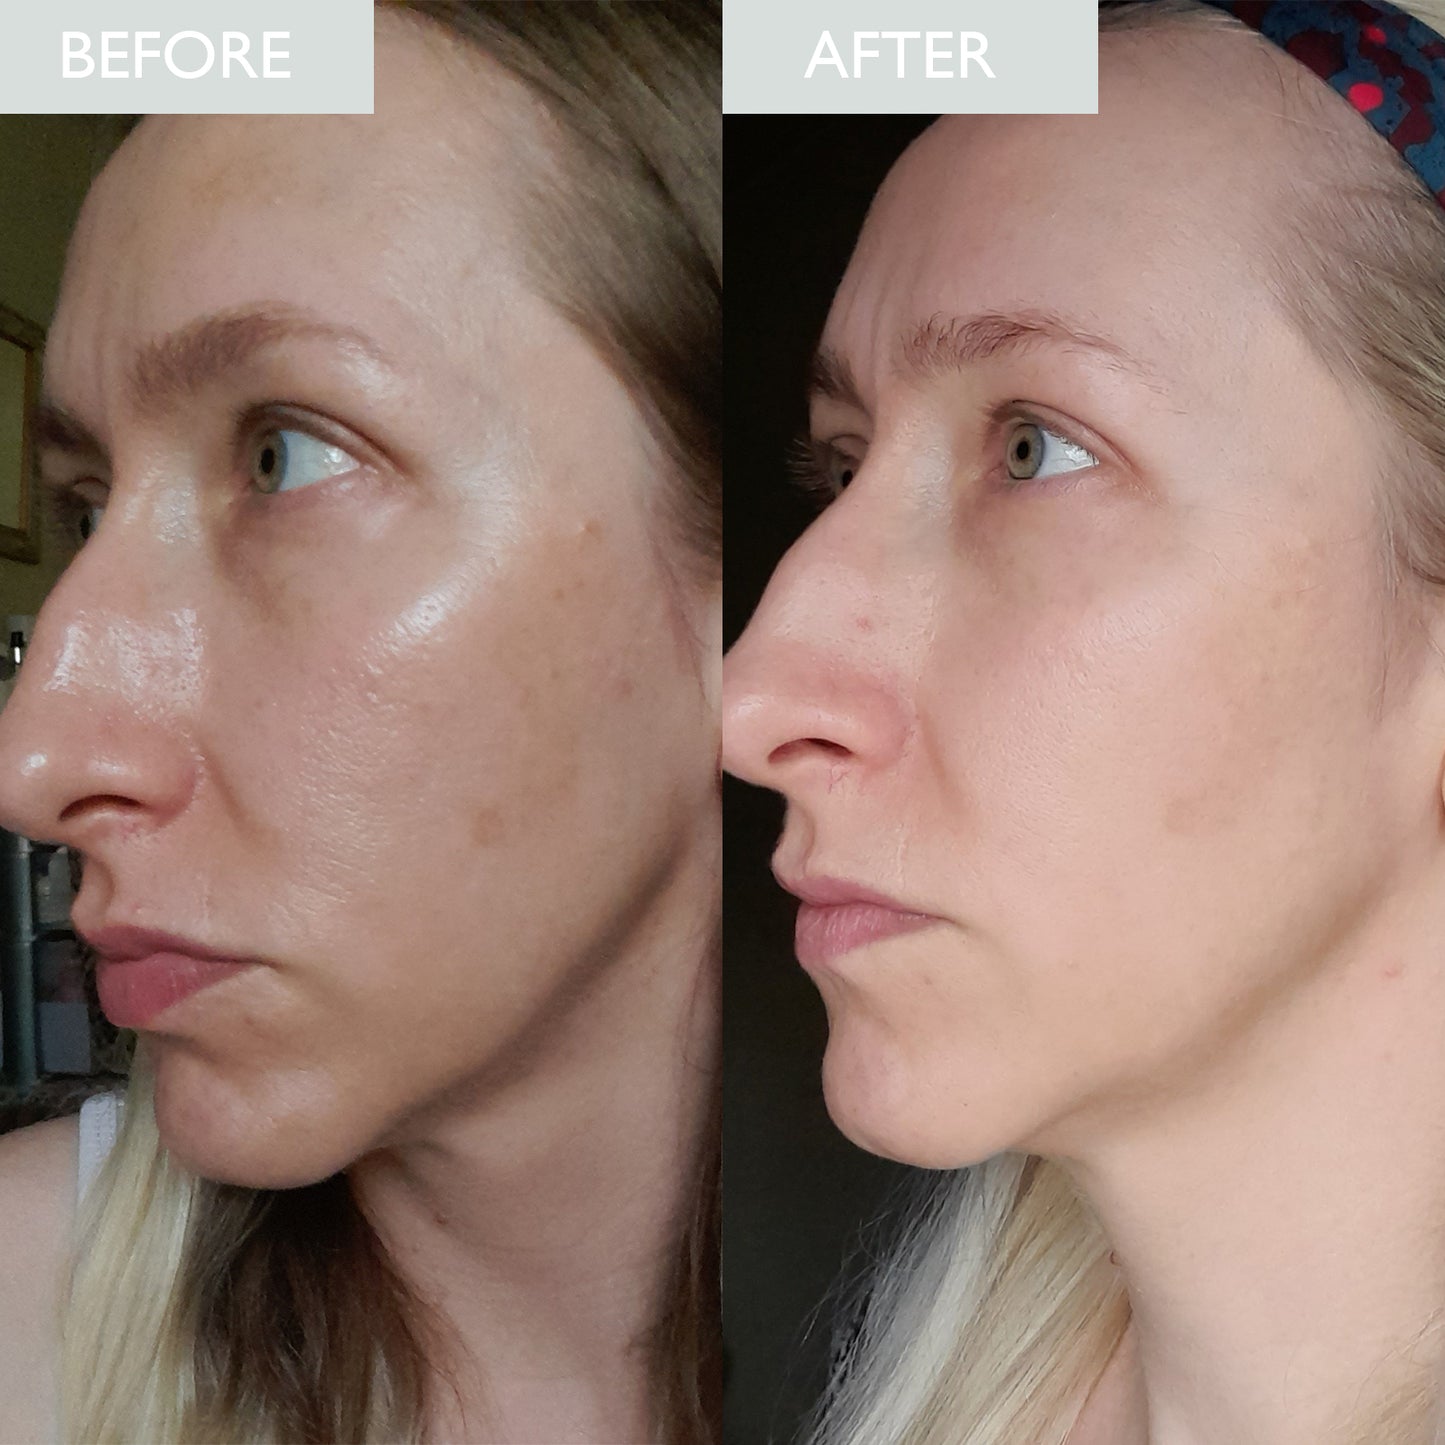 Before and after results of a lady with oily skin using the purifying daily moisturiser with SPF 30